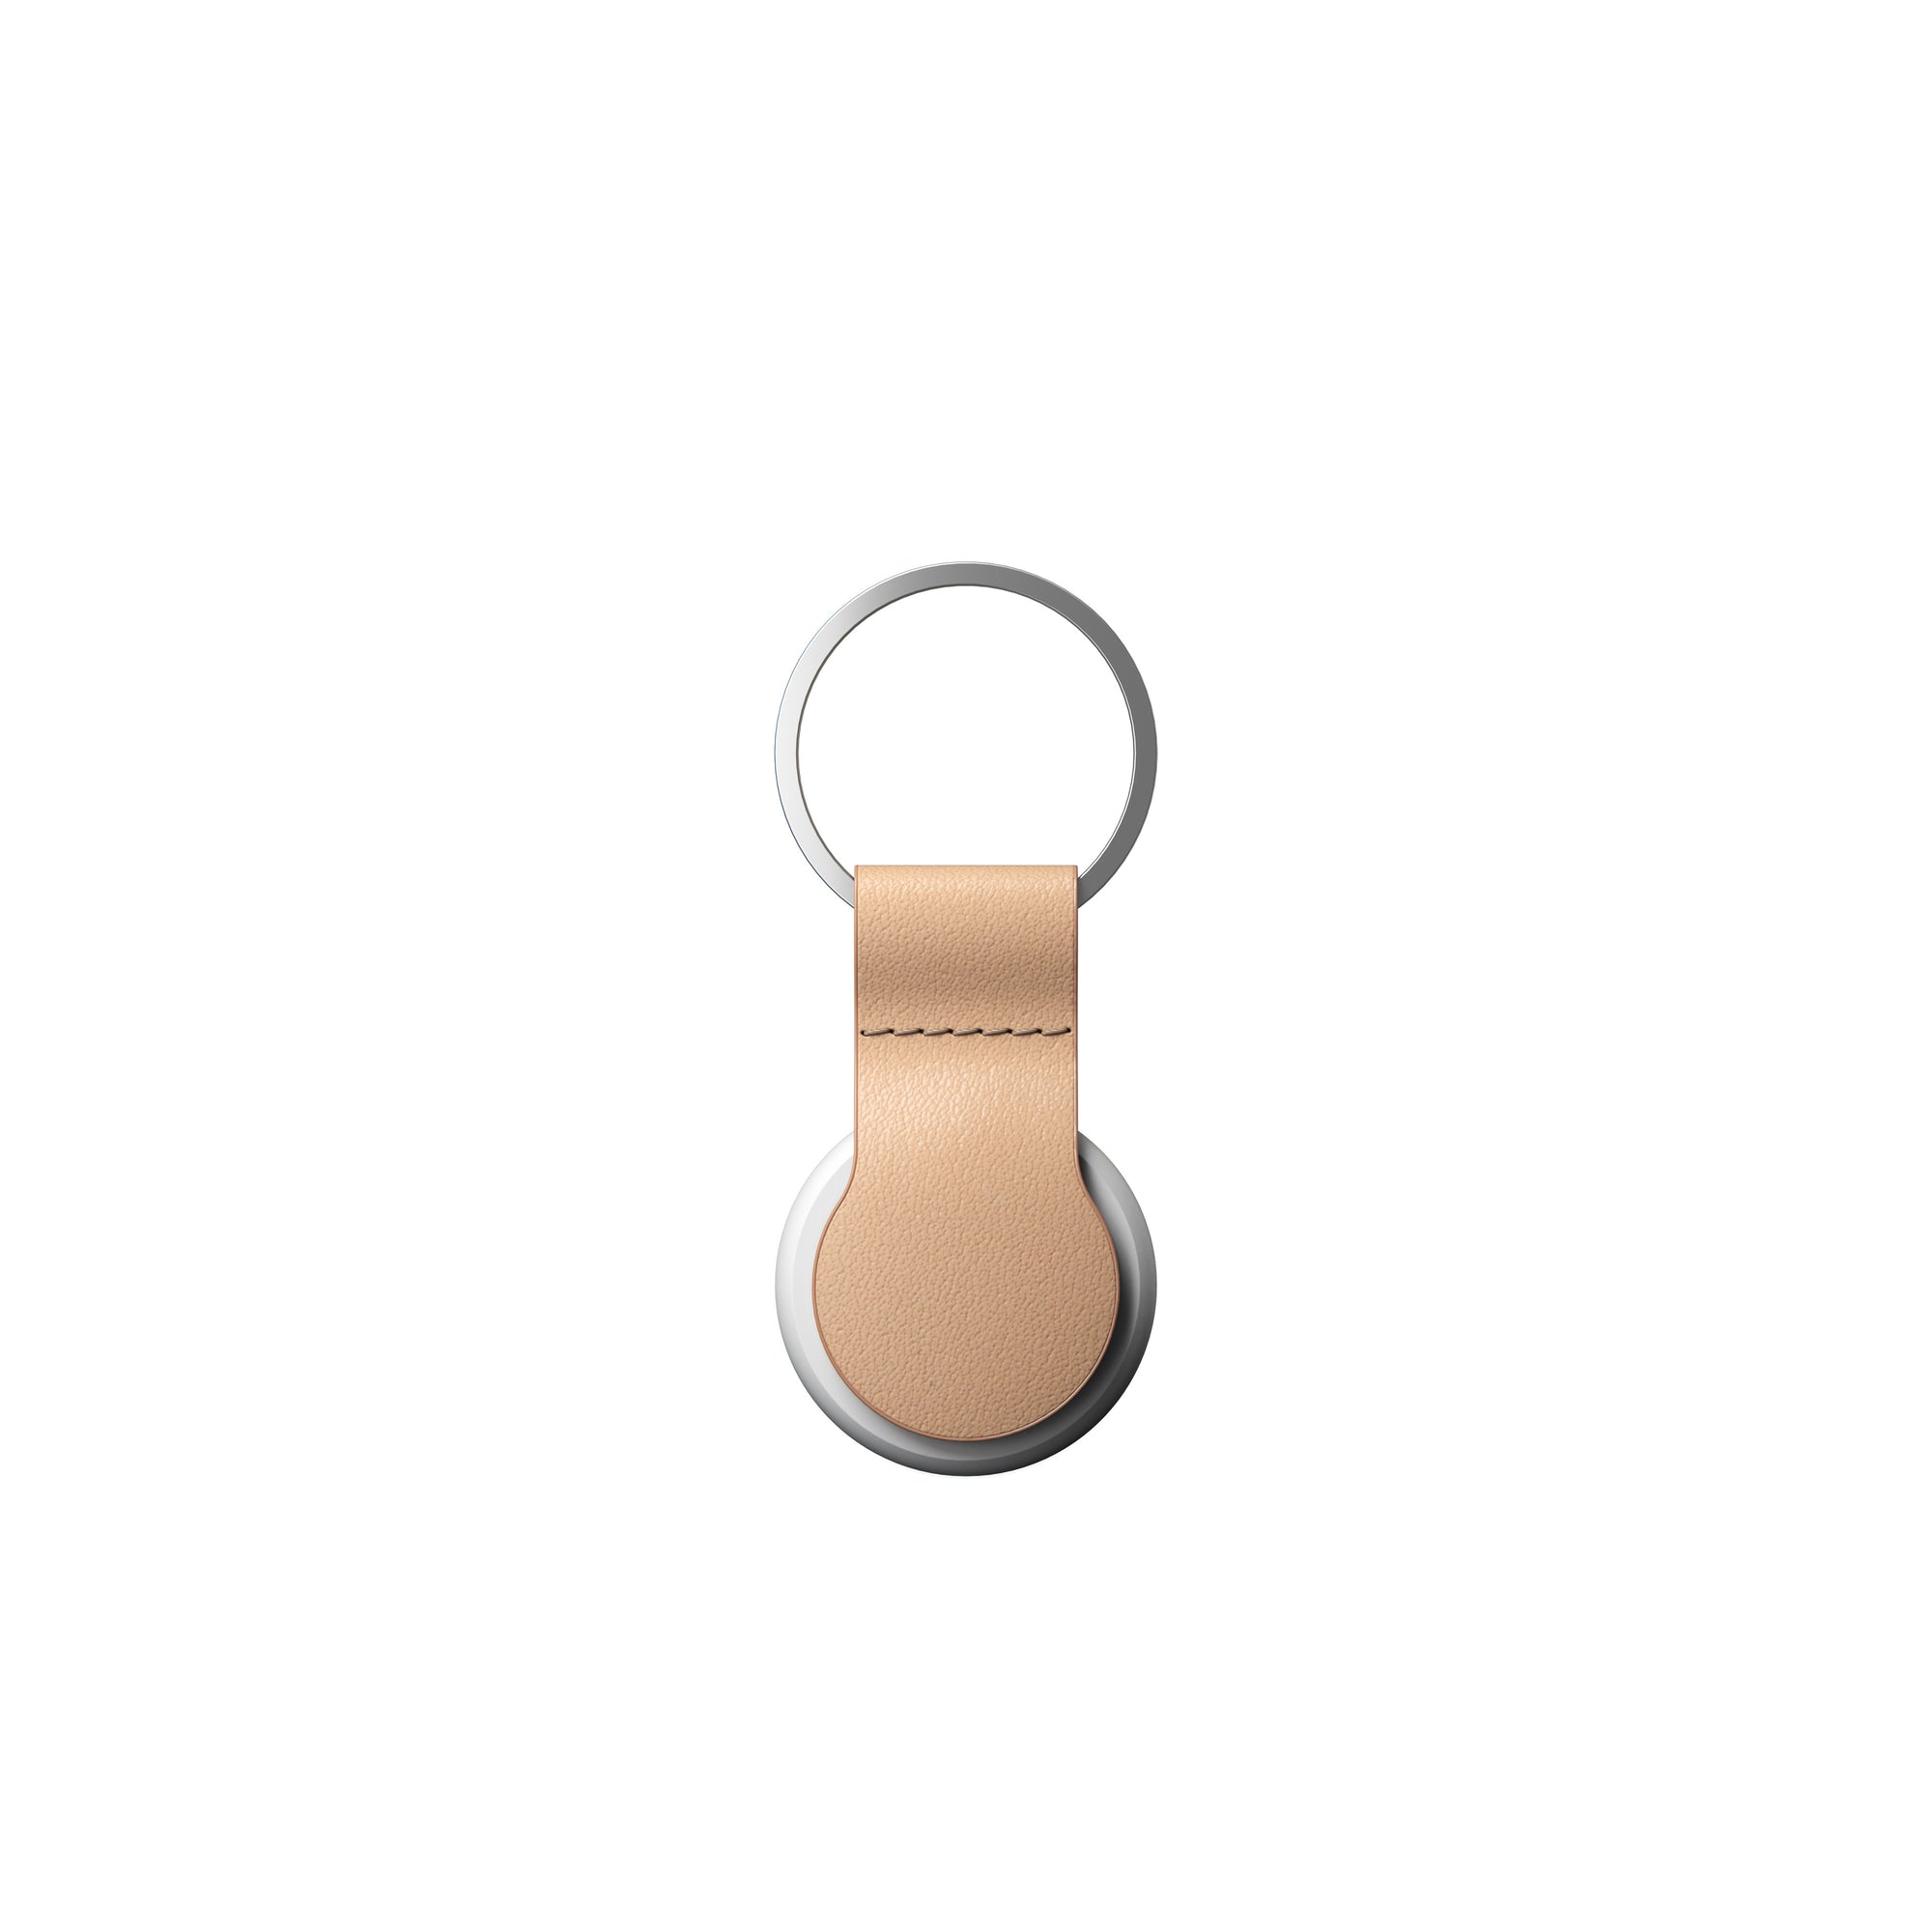 Nomad Leather Loop AirTag Keychain - NATURAL - Mac Addict